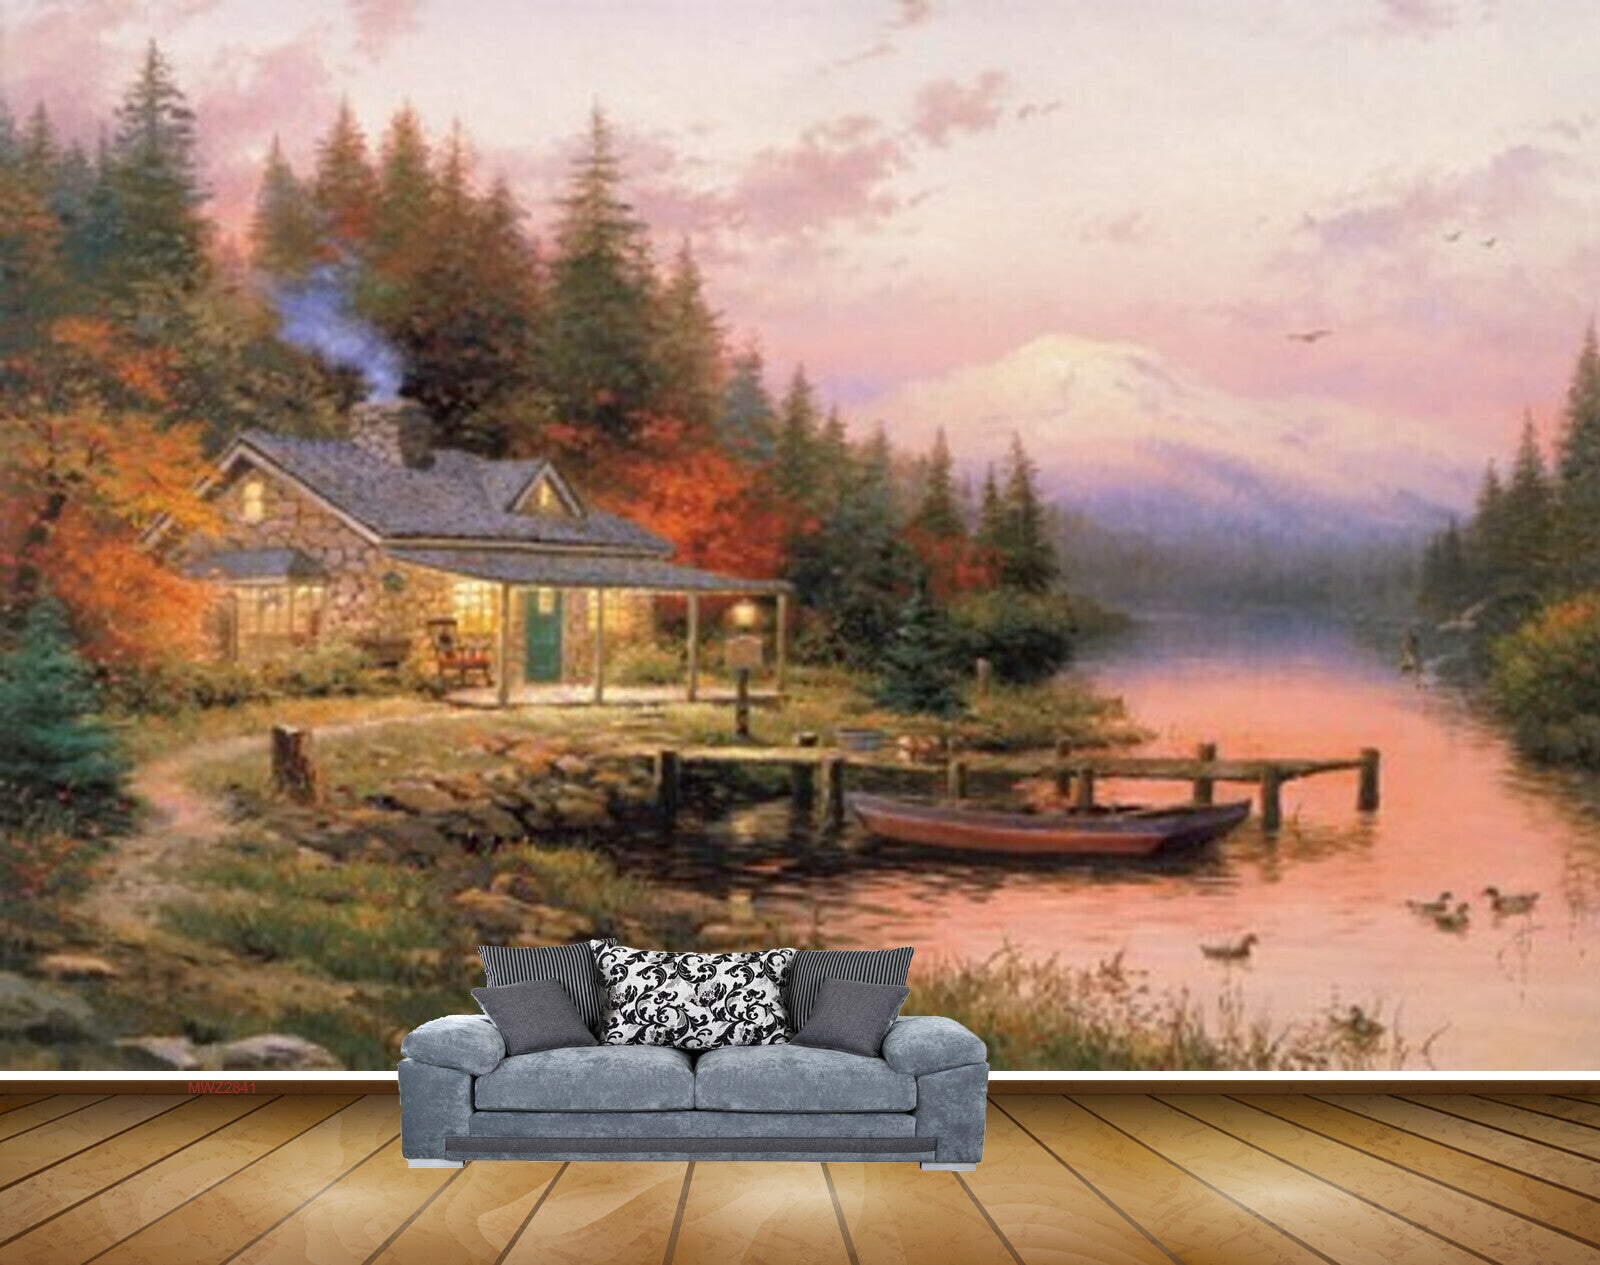 Avikalp MWZ2841 Mountains Trees Birds House Chair Boat Wooden Grass Stones River Lake Pond Water Painting HD Wallpaper